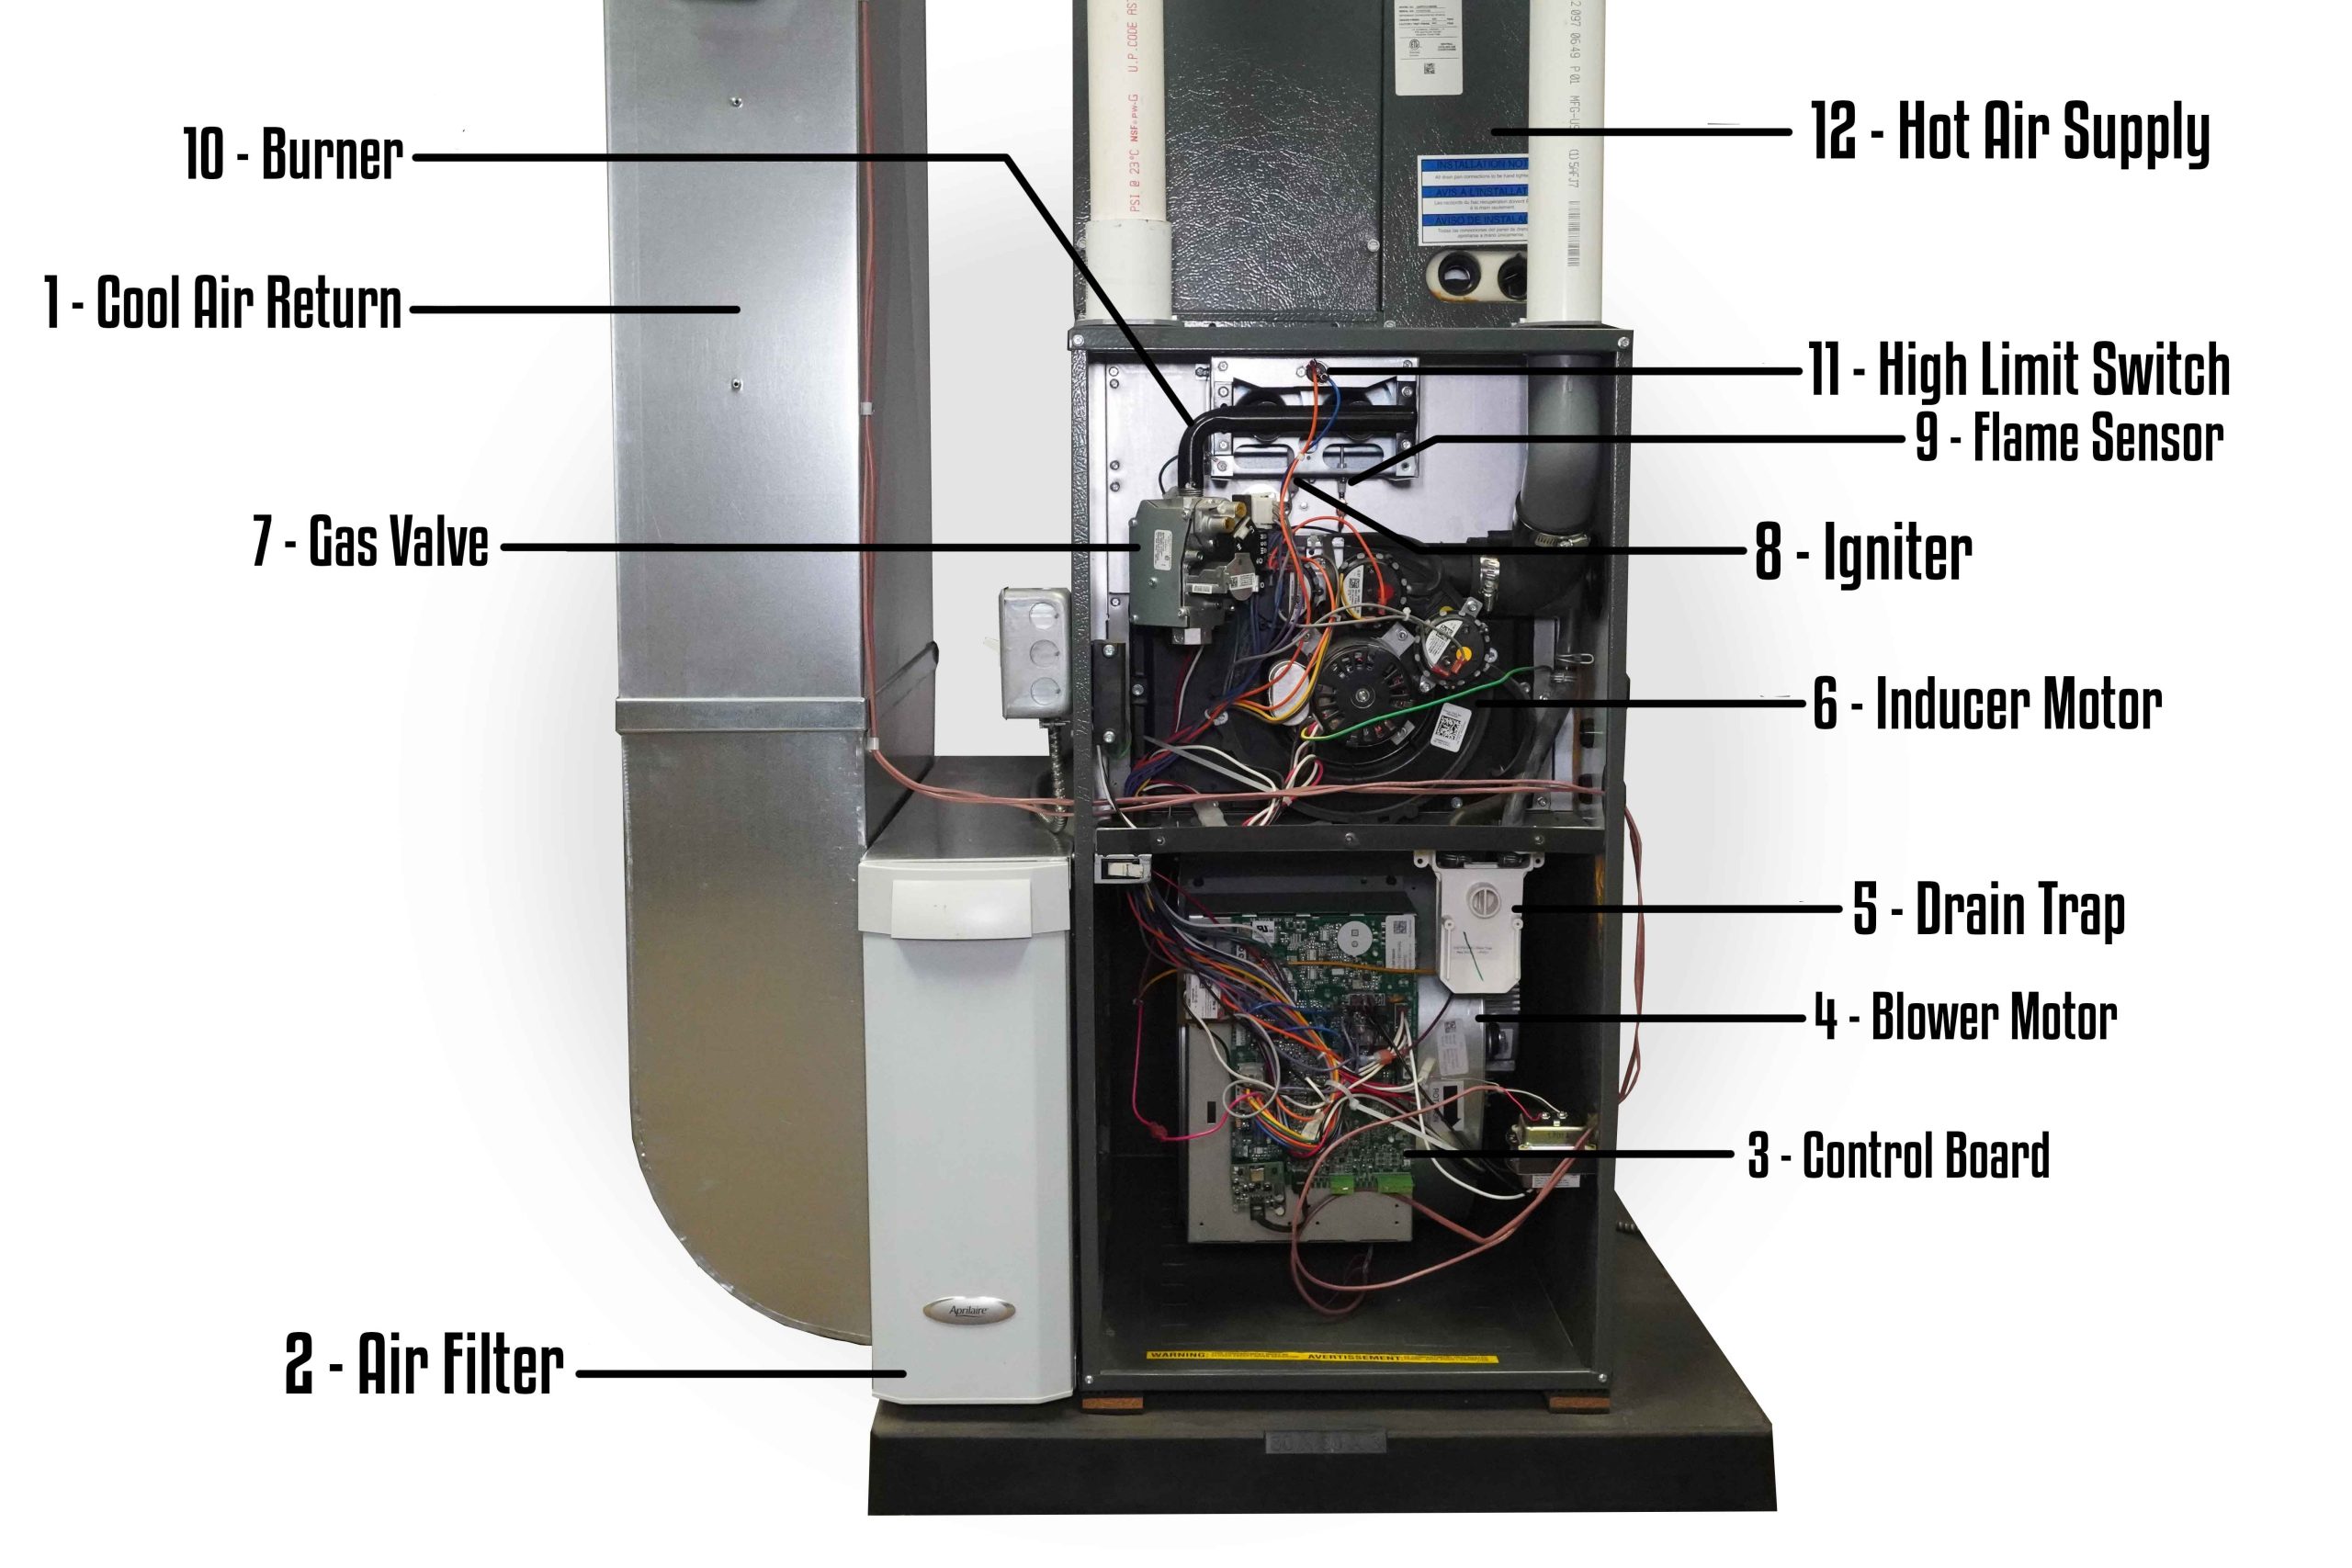 Furnace Anatomy - LA Construction Heating and Air